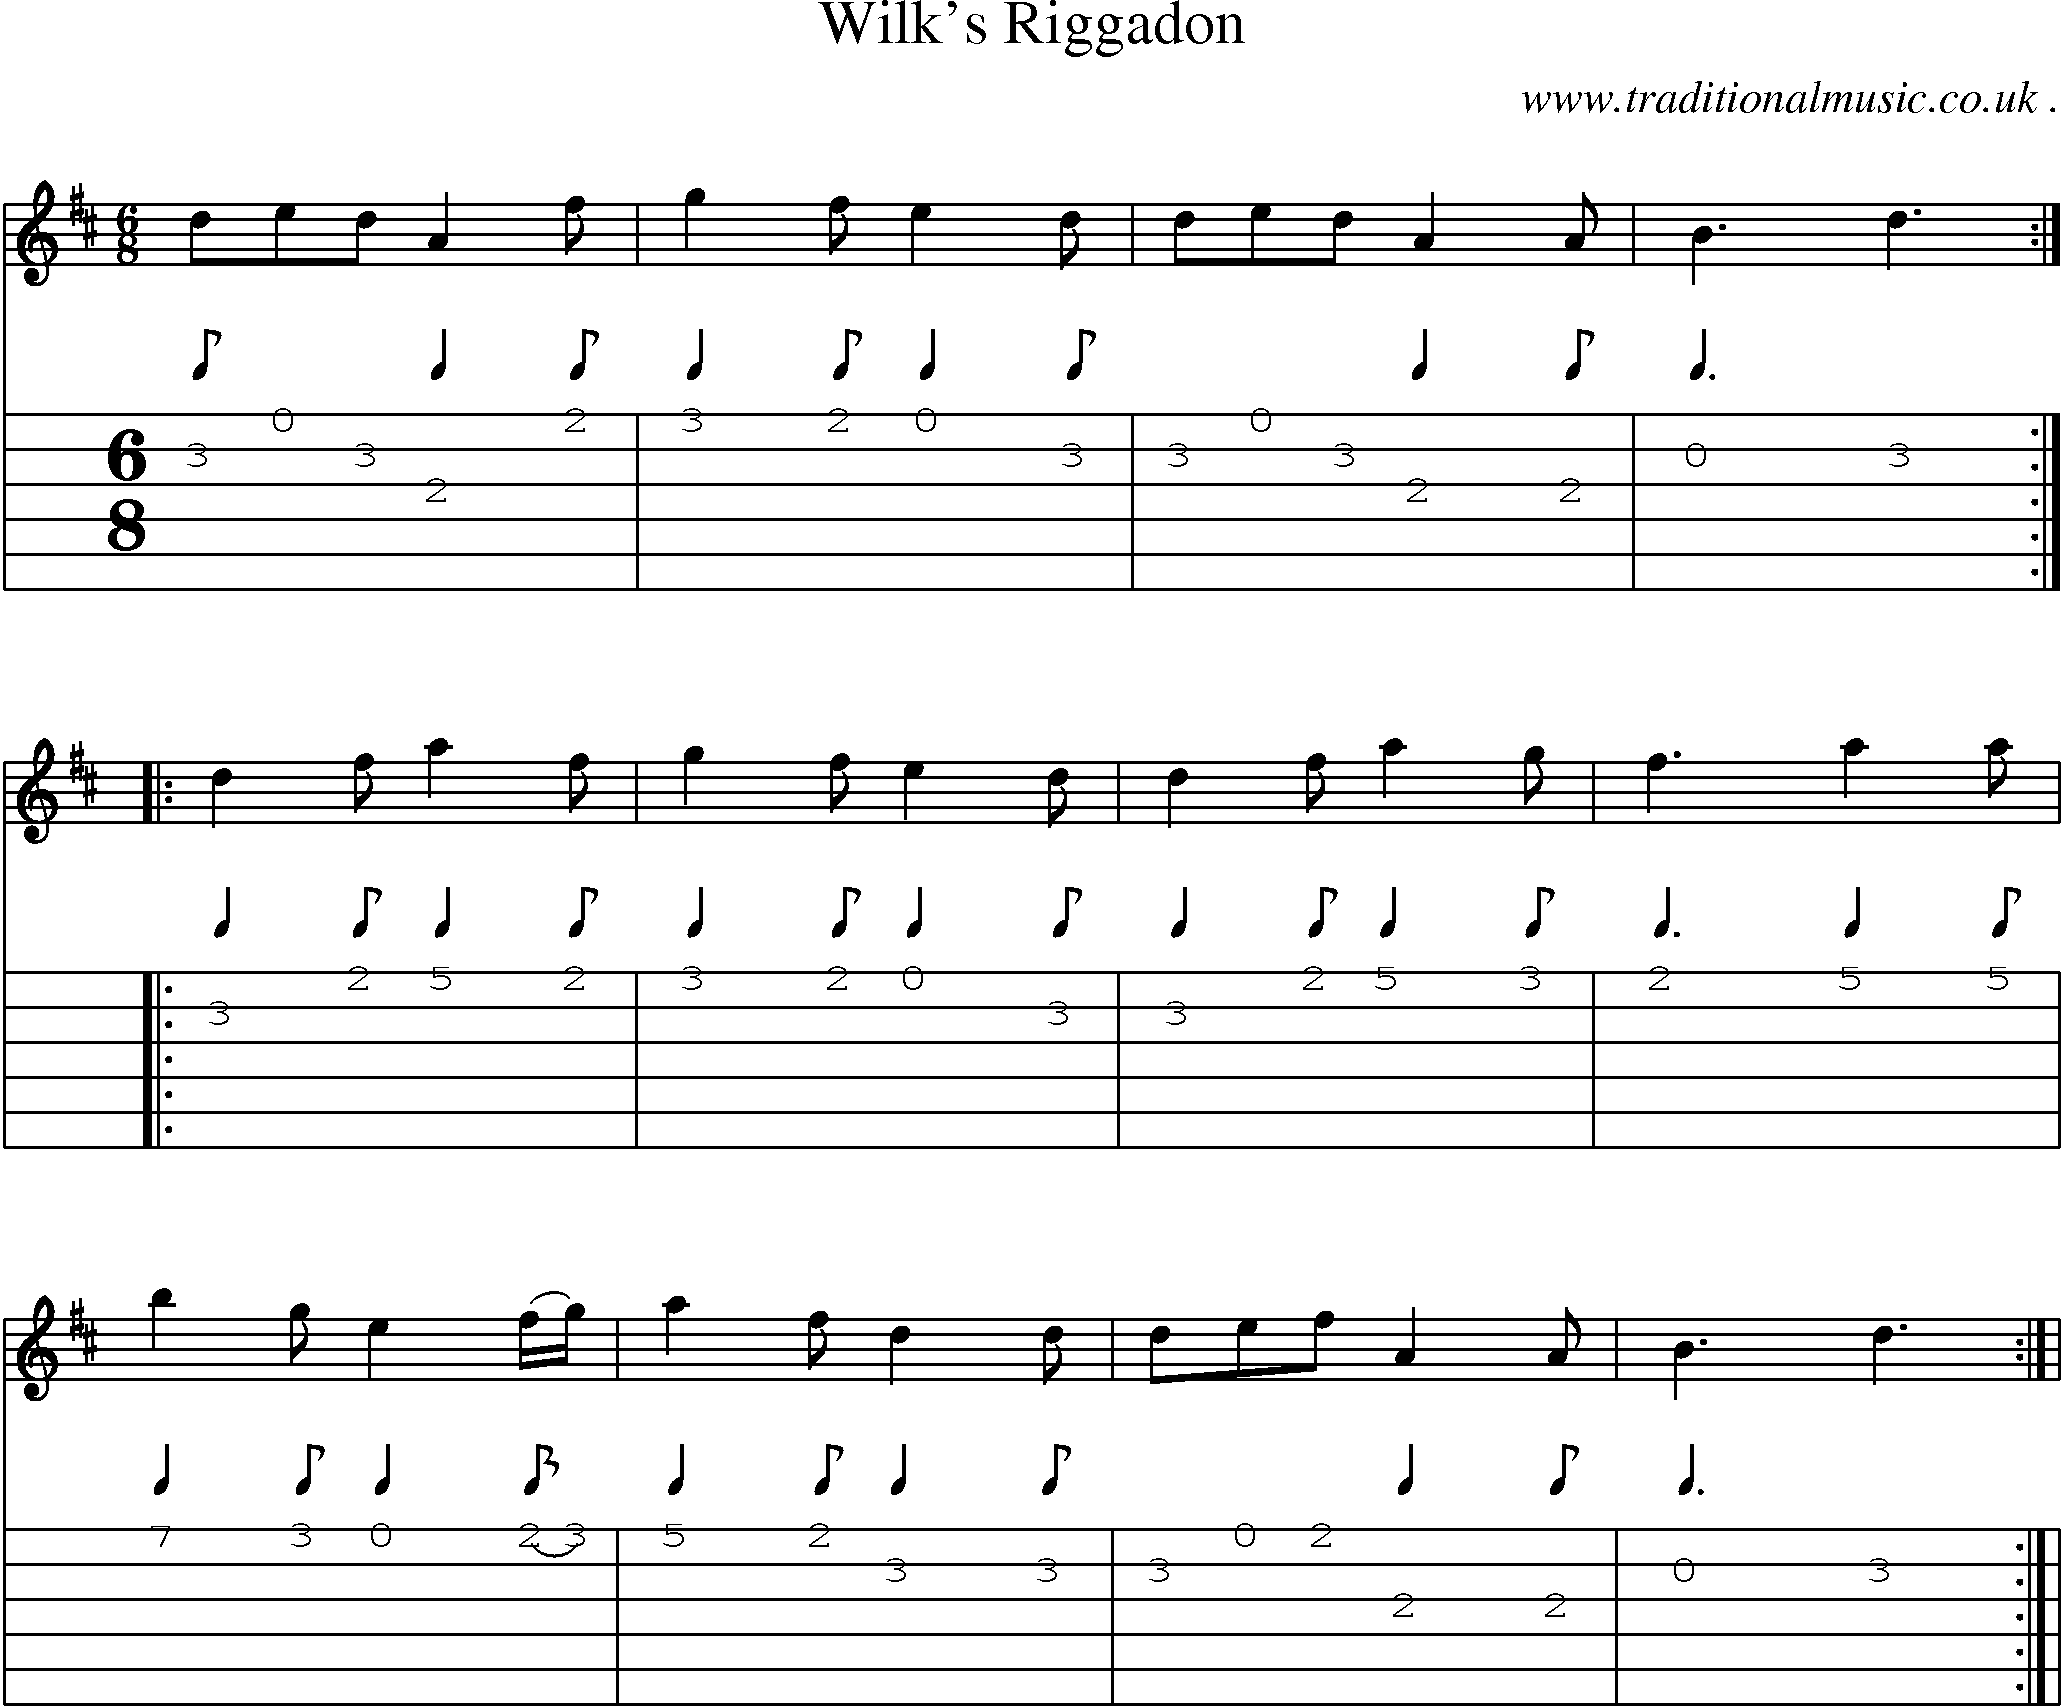 Sheet-Music and Guitar Tabs for Wilks Riggadon